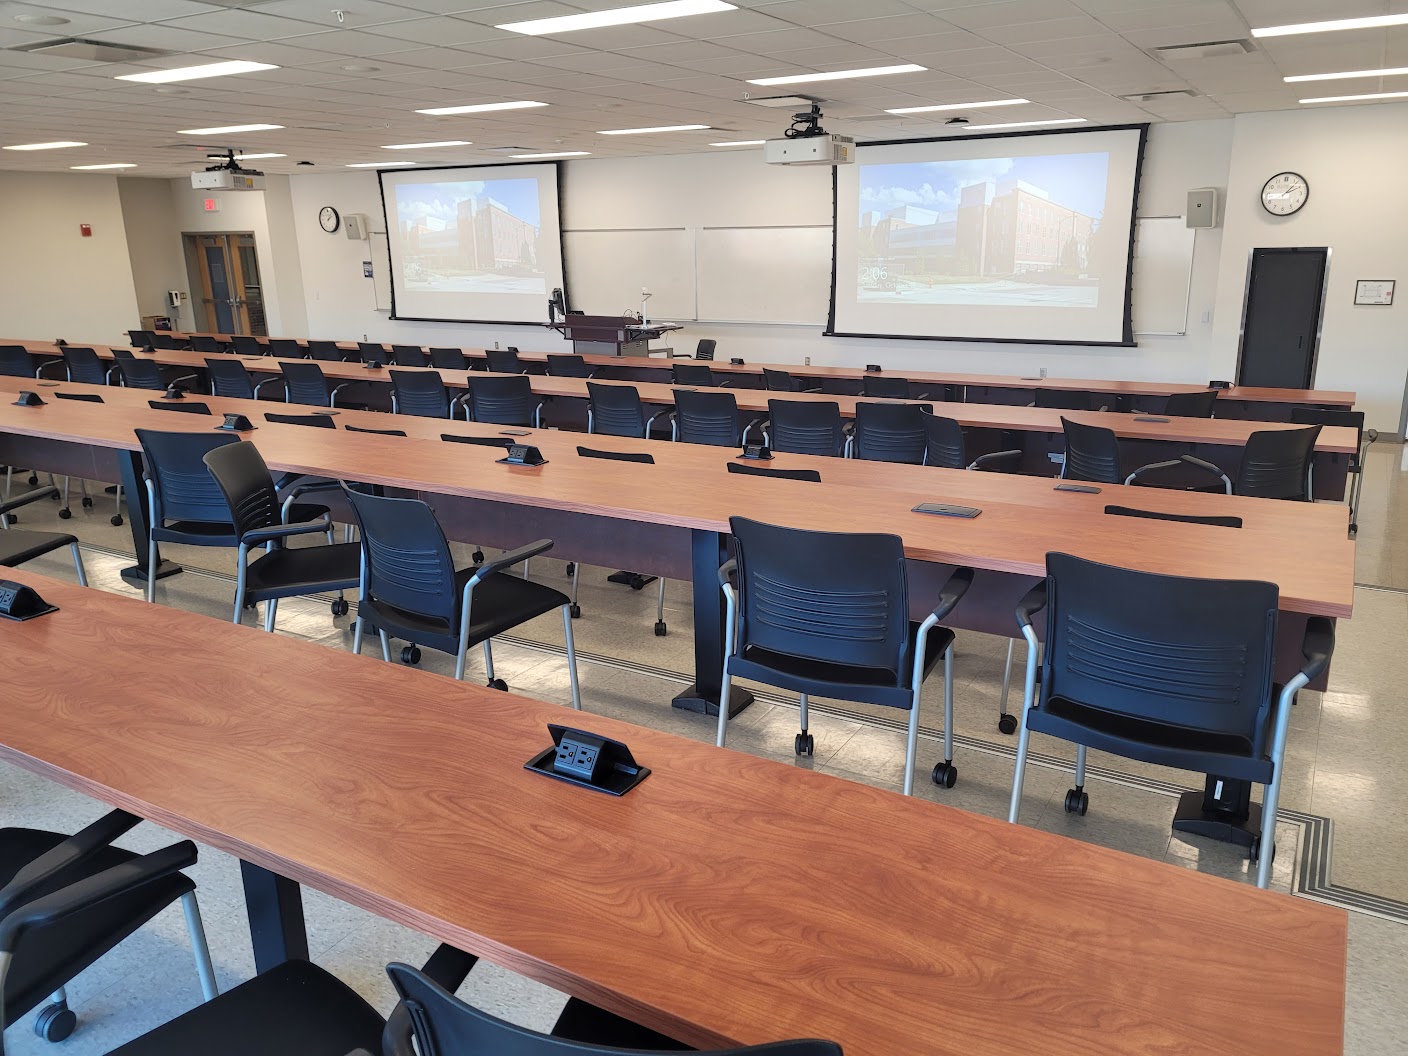 This is a view of the room, with a front lecture table and white boards.